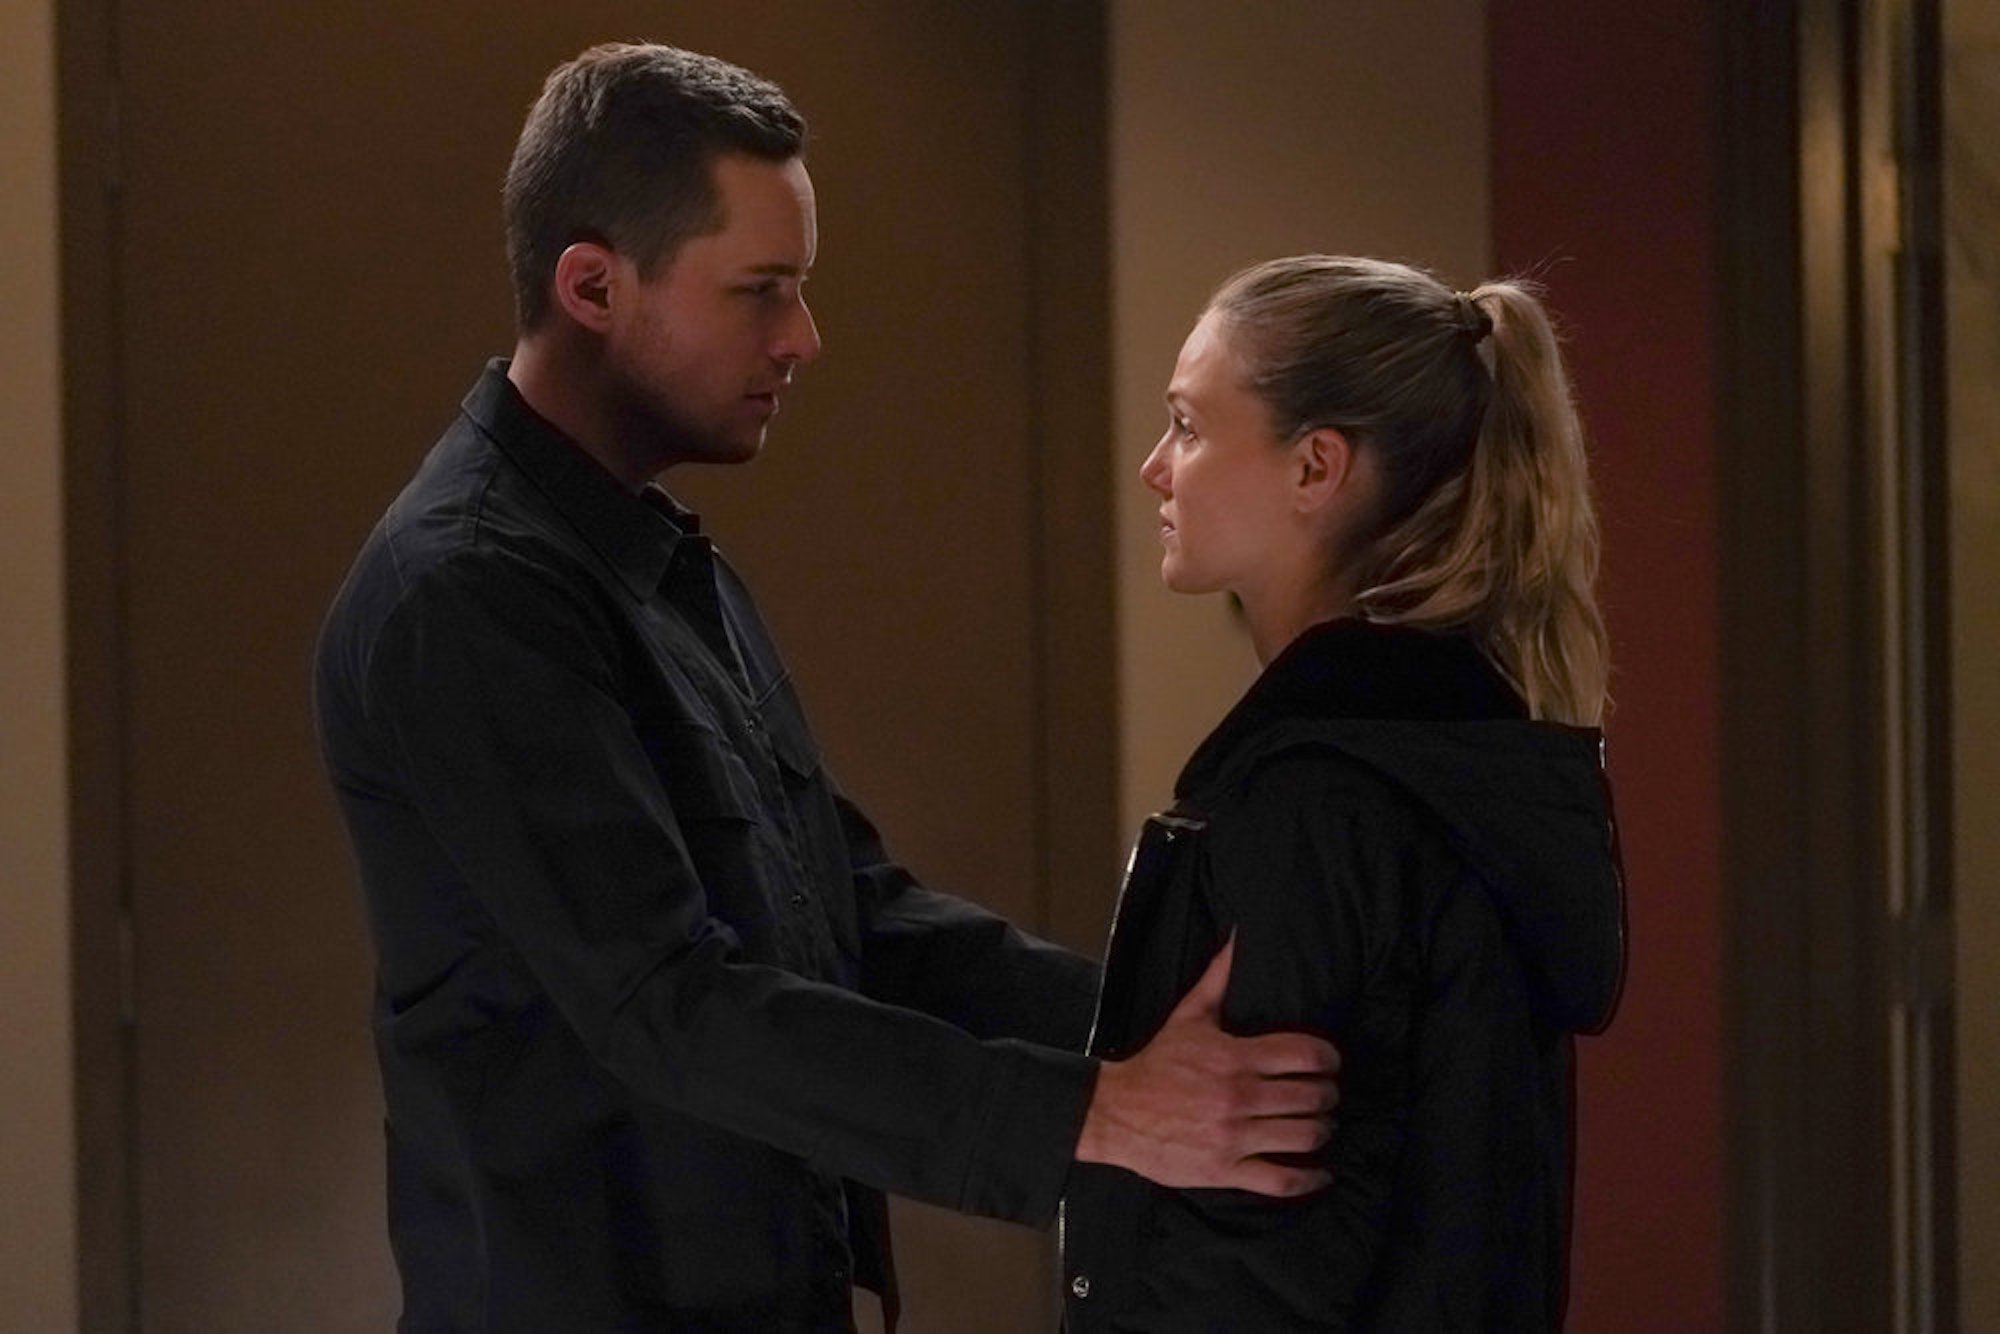 Jay Halstead holding on to Hailey Upton's shoulders in 'Chicago P.D.' Season 9. 'Chicago P.D. Season 9 spoilers show there's major tension between these two at the end of episode 4 